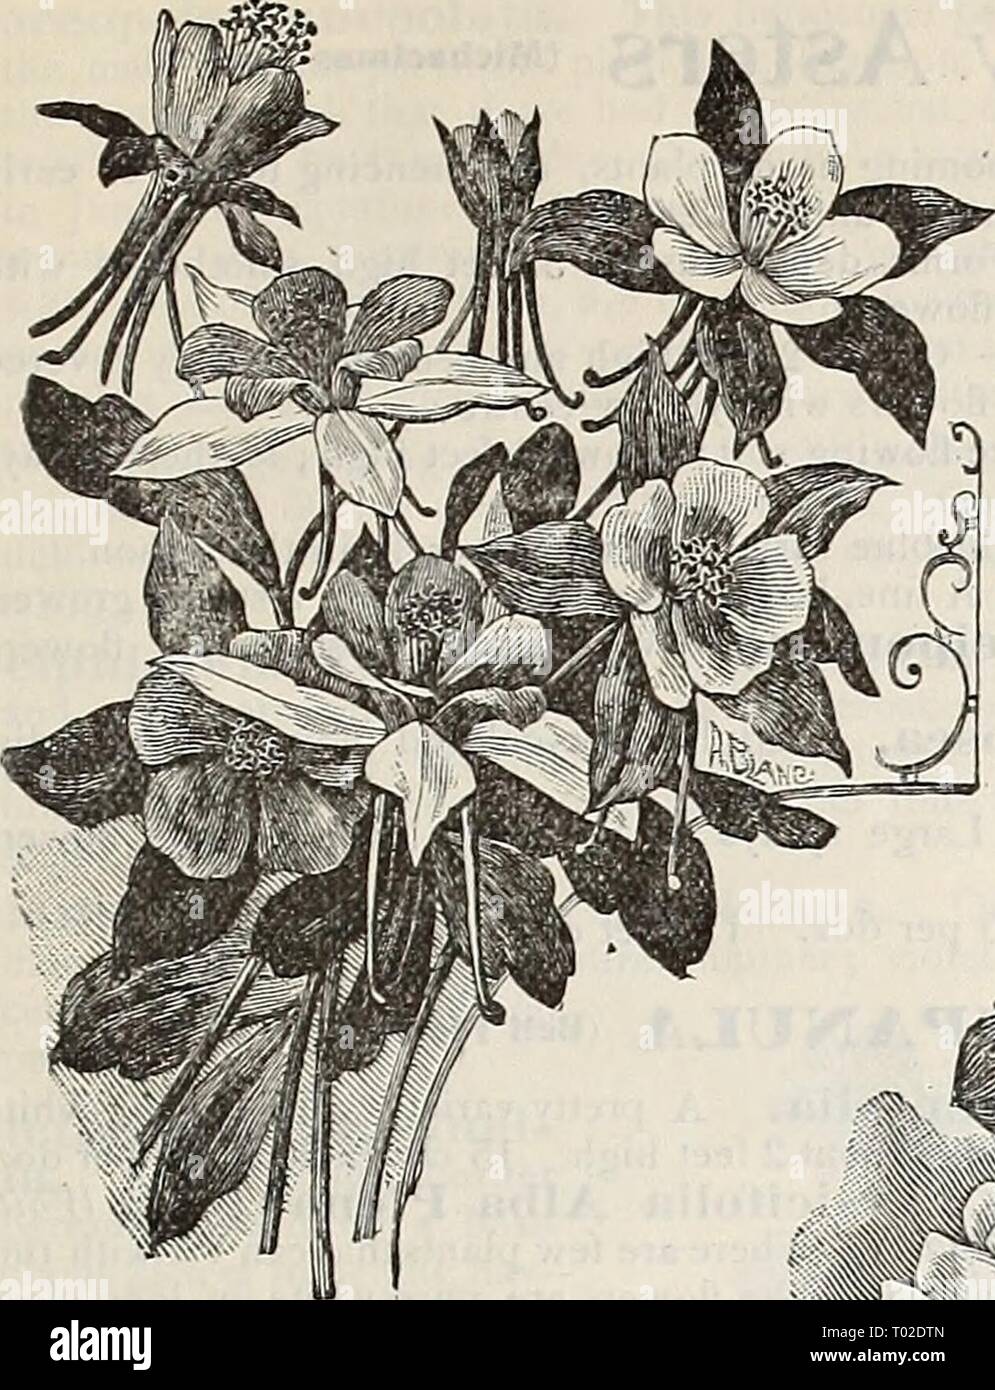 Dreer's garden calendar : 1898 . dreersgardencale1898henr Year: 1898  SELECT LIST OF HARDY PERENNIALS.    Aquilegia Glandulosa. ANEMONE JAPONICA. One of the most beautiful of ihe hardy herbaceous plants. They com- mence to open their lich-colored blooms in August, and continue to incrense in beauty until cut by frost. They thrive l)est in a light, rich, moist soil, and should not be transplanted more than is necessary. Alba. Pure white, yellow centre and dark eye. Elegaus. Carmine, yellow centre, dark eye. Liady Ardilaiin. A pure white variety, with broad, overlapping petals. Whirlwind.. A sem Stock Photo